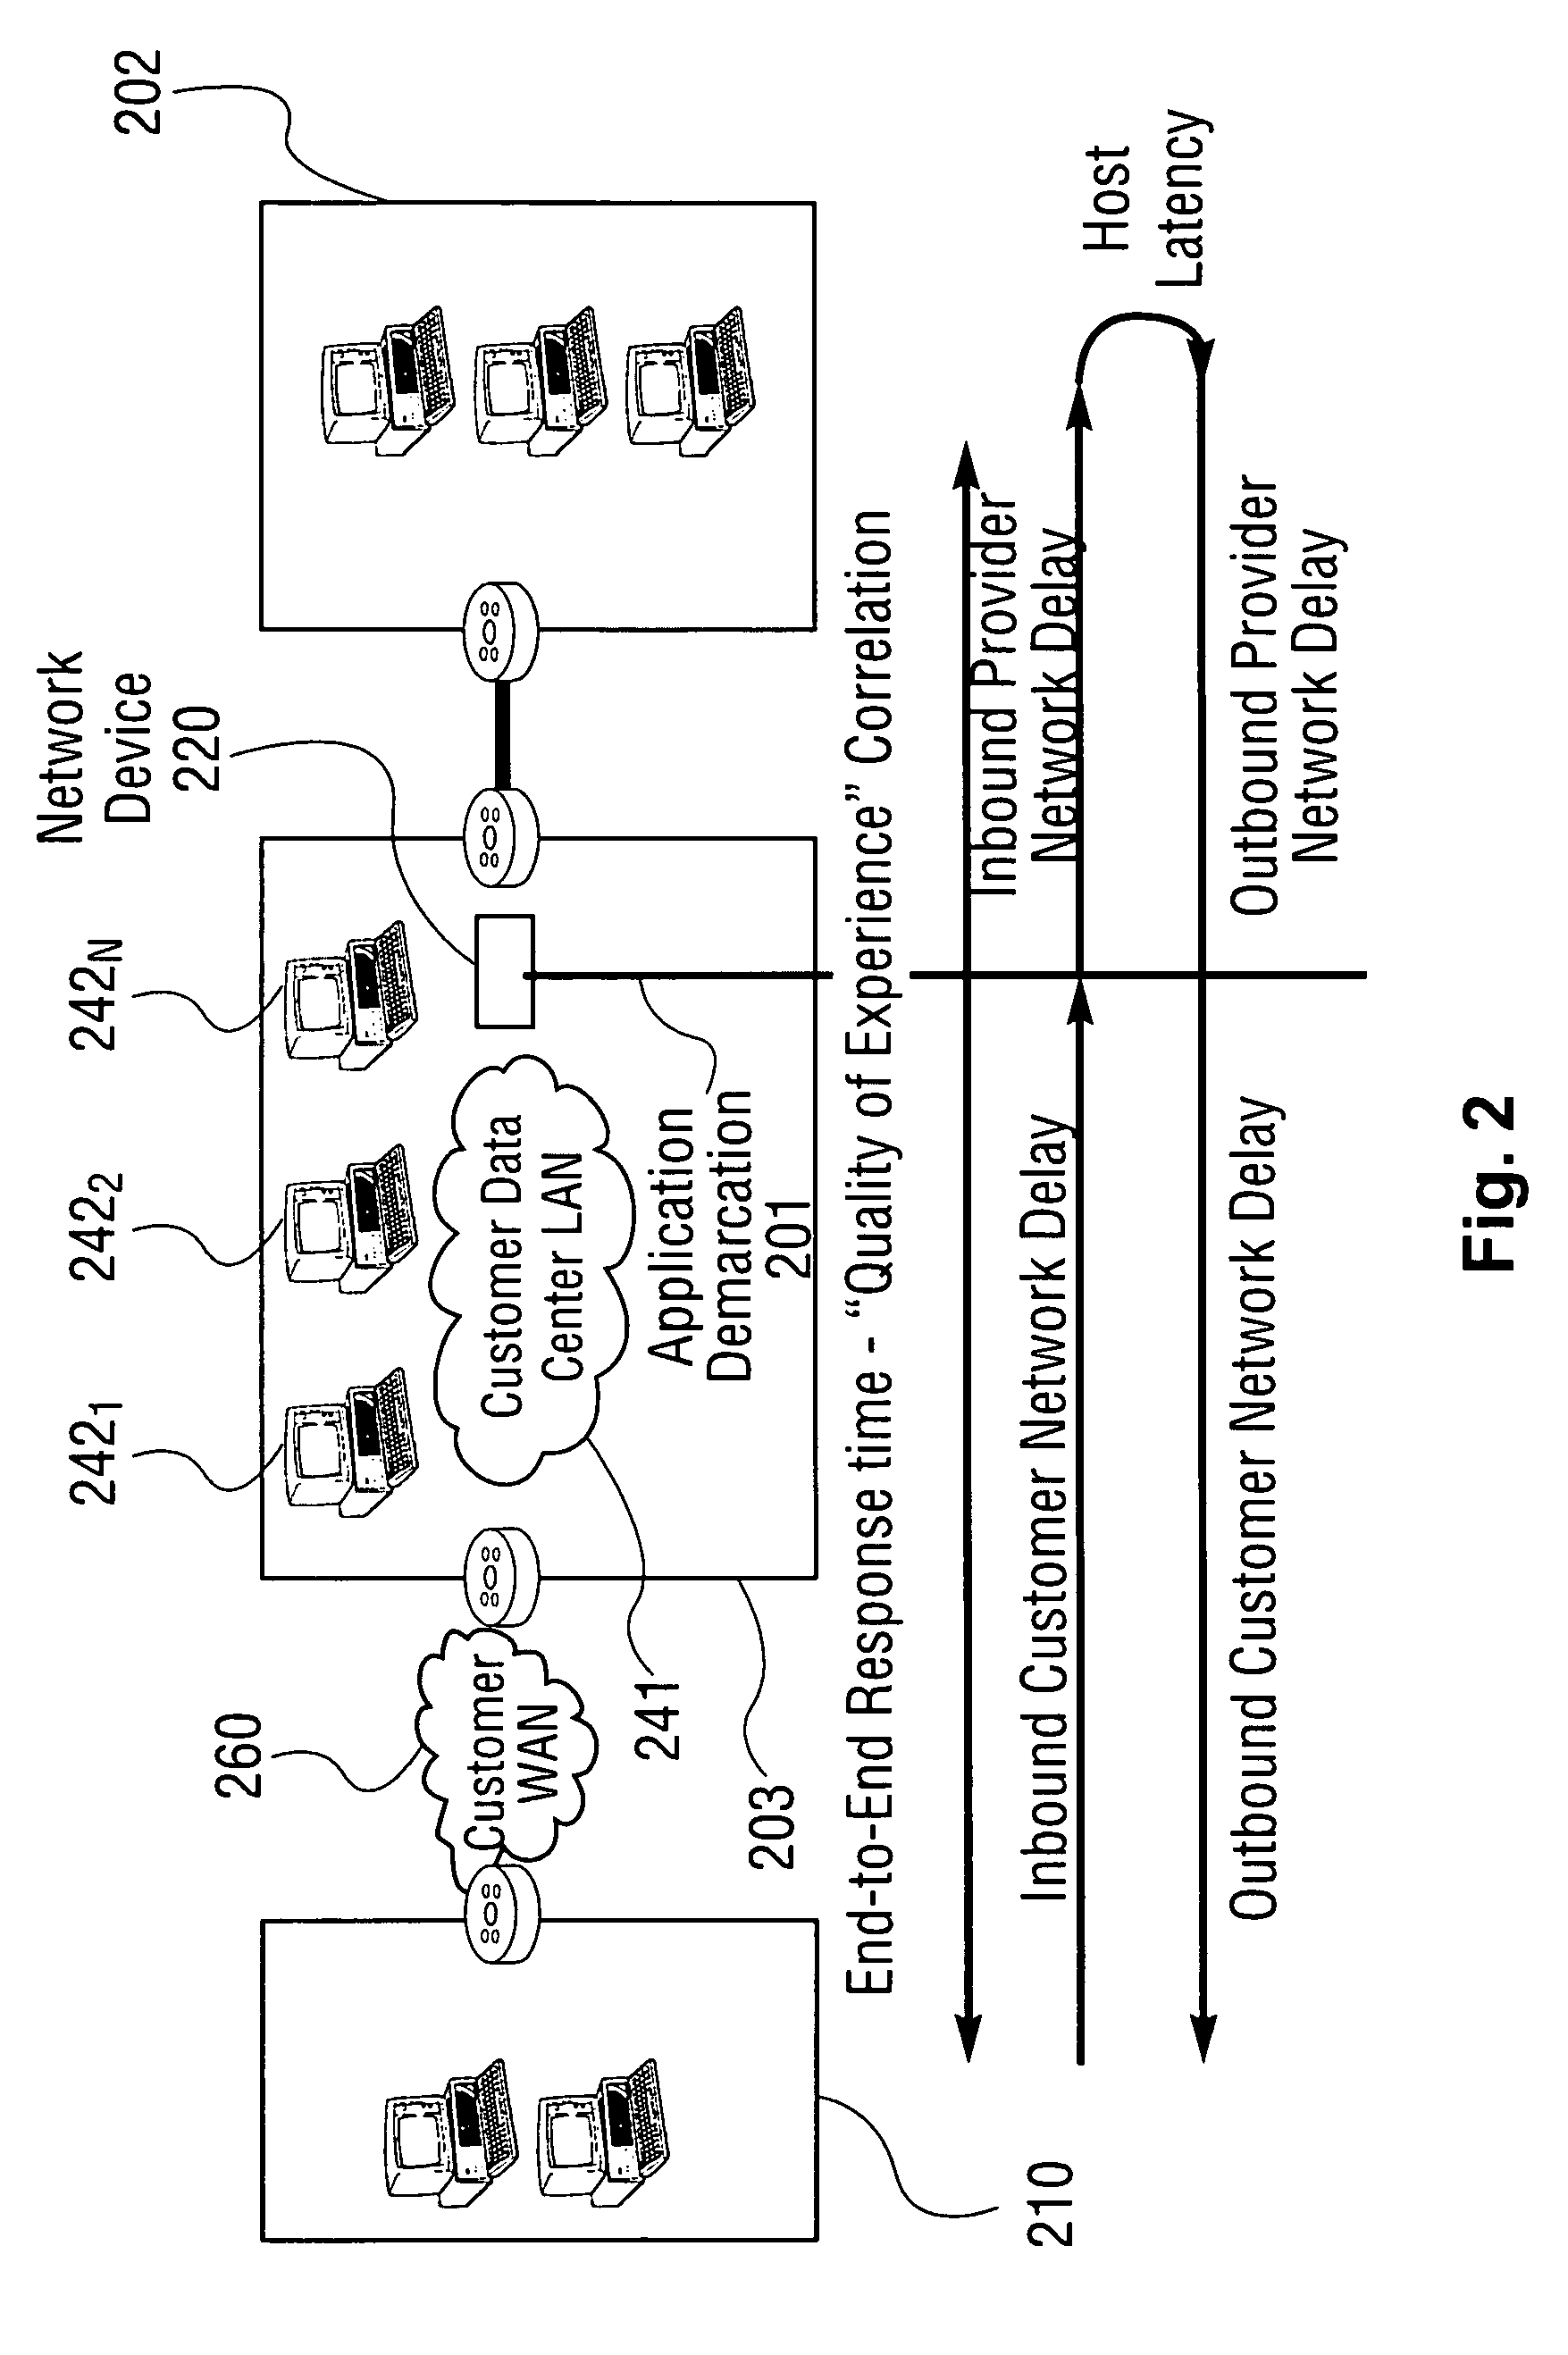 Application service level mediation and method of using the same